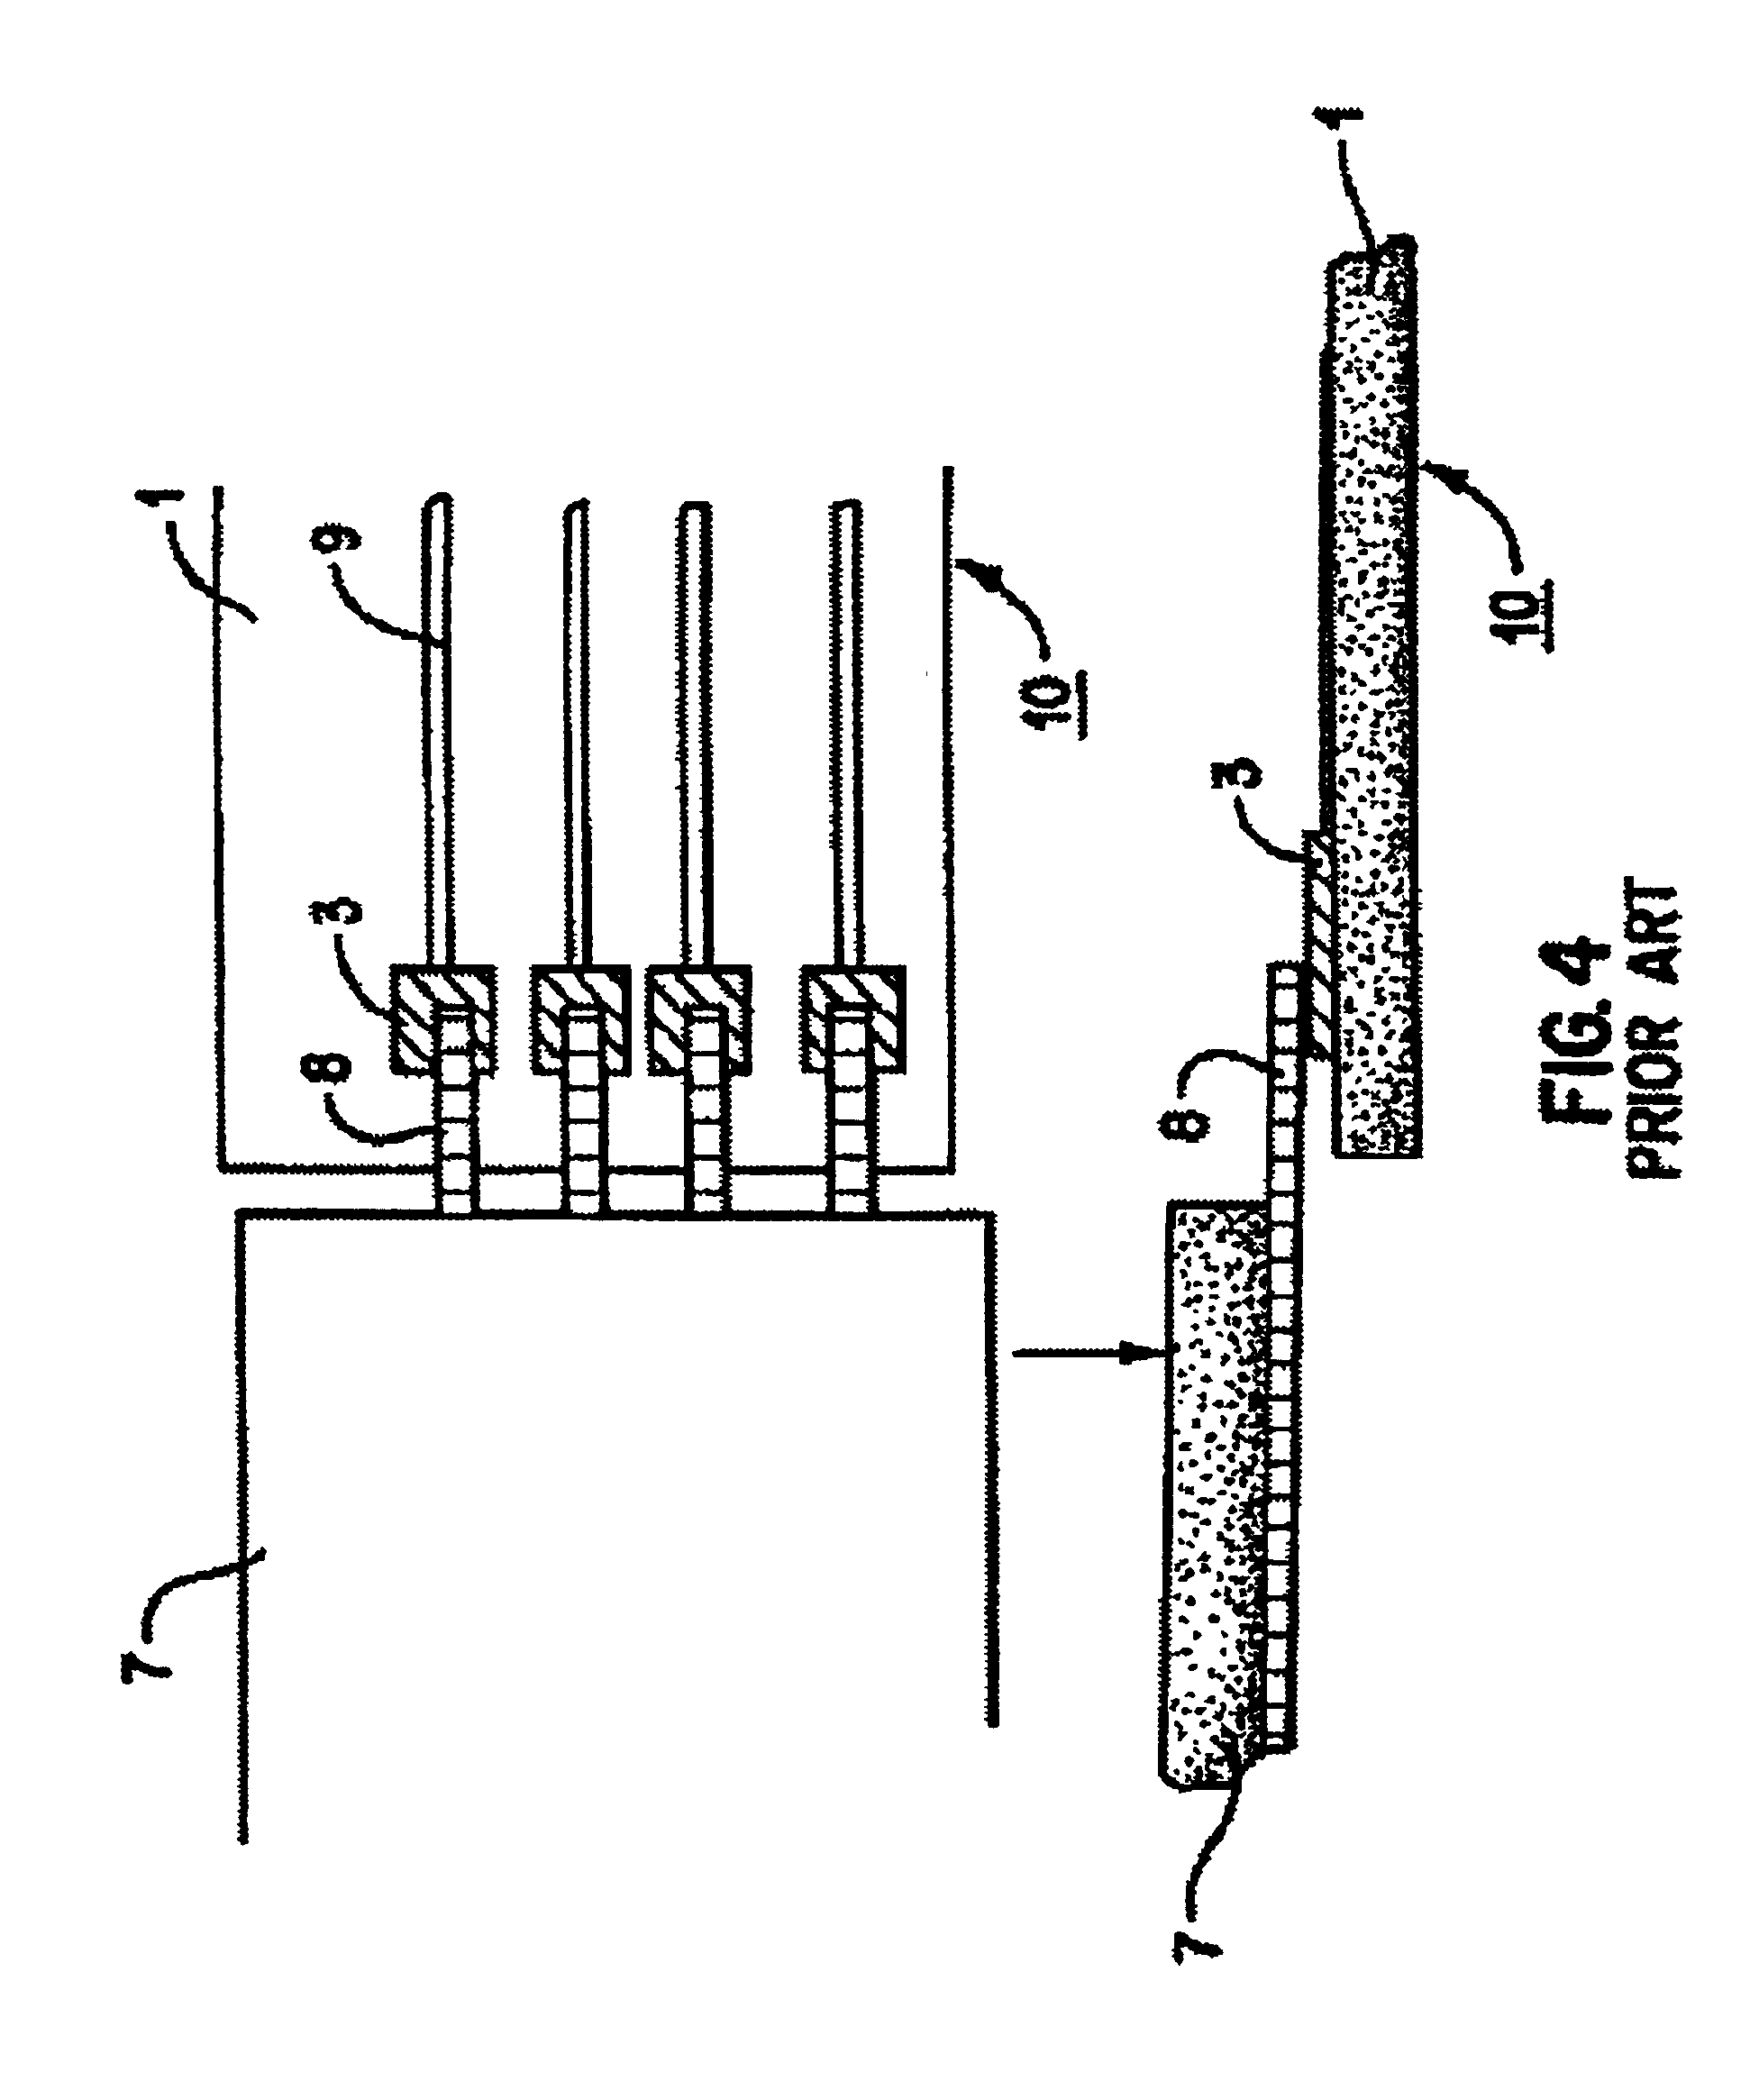 Photolithographically-patterned variable capacitor structures and method of making